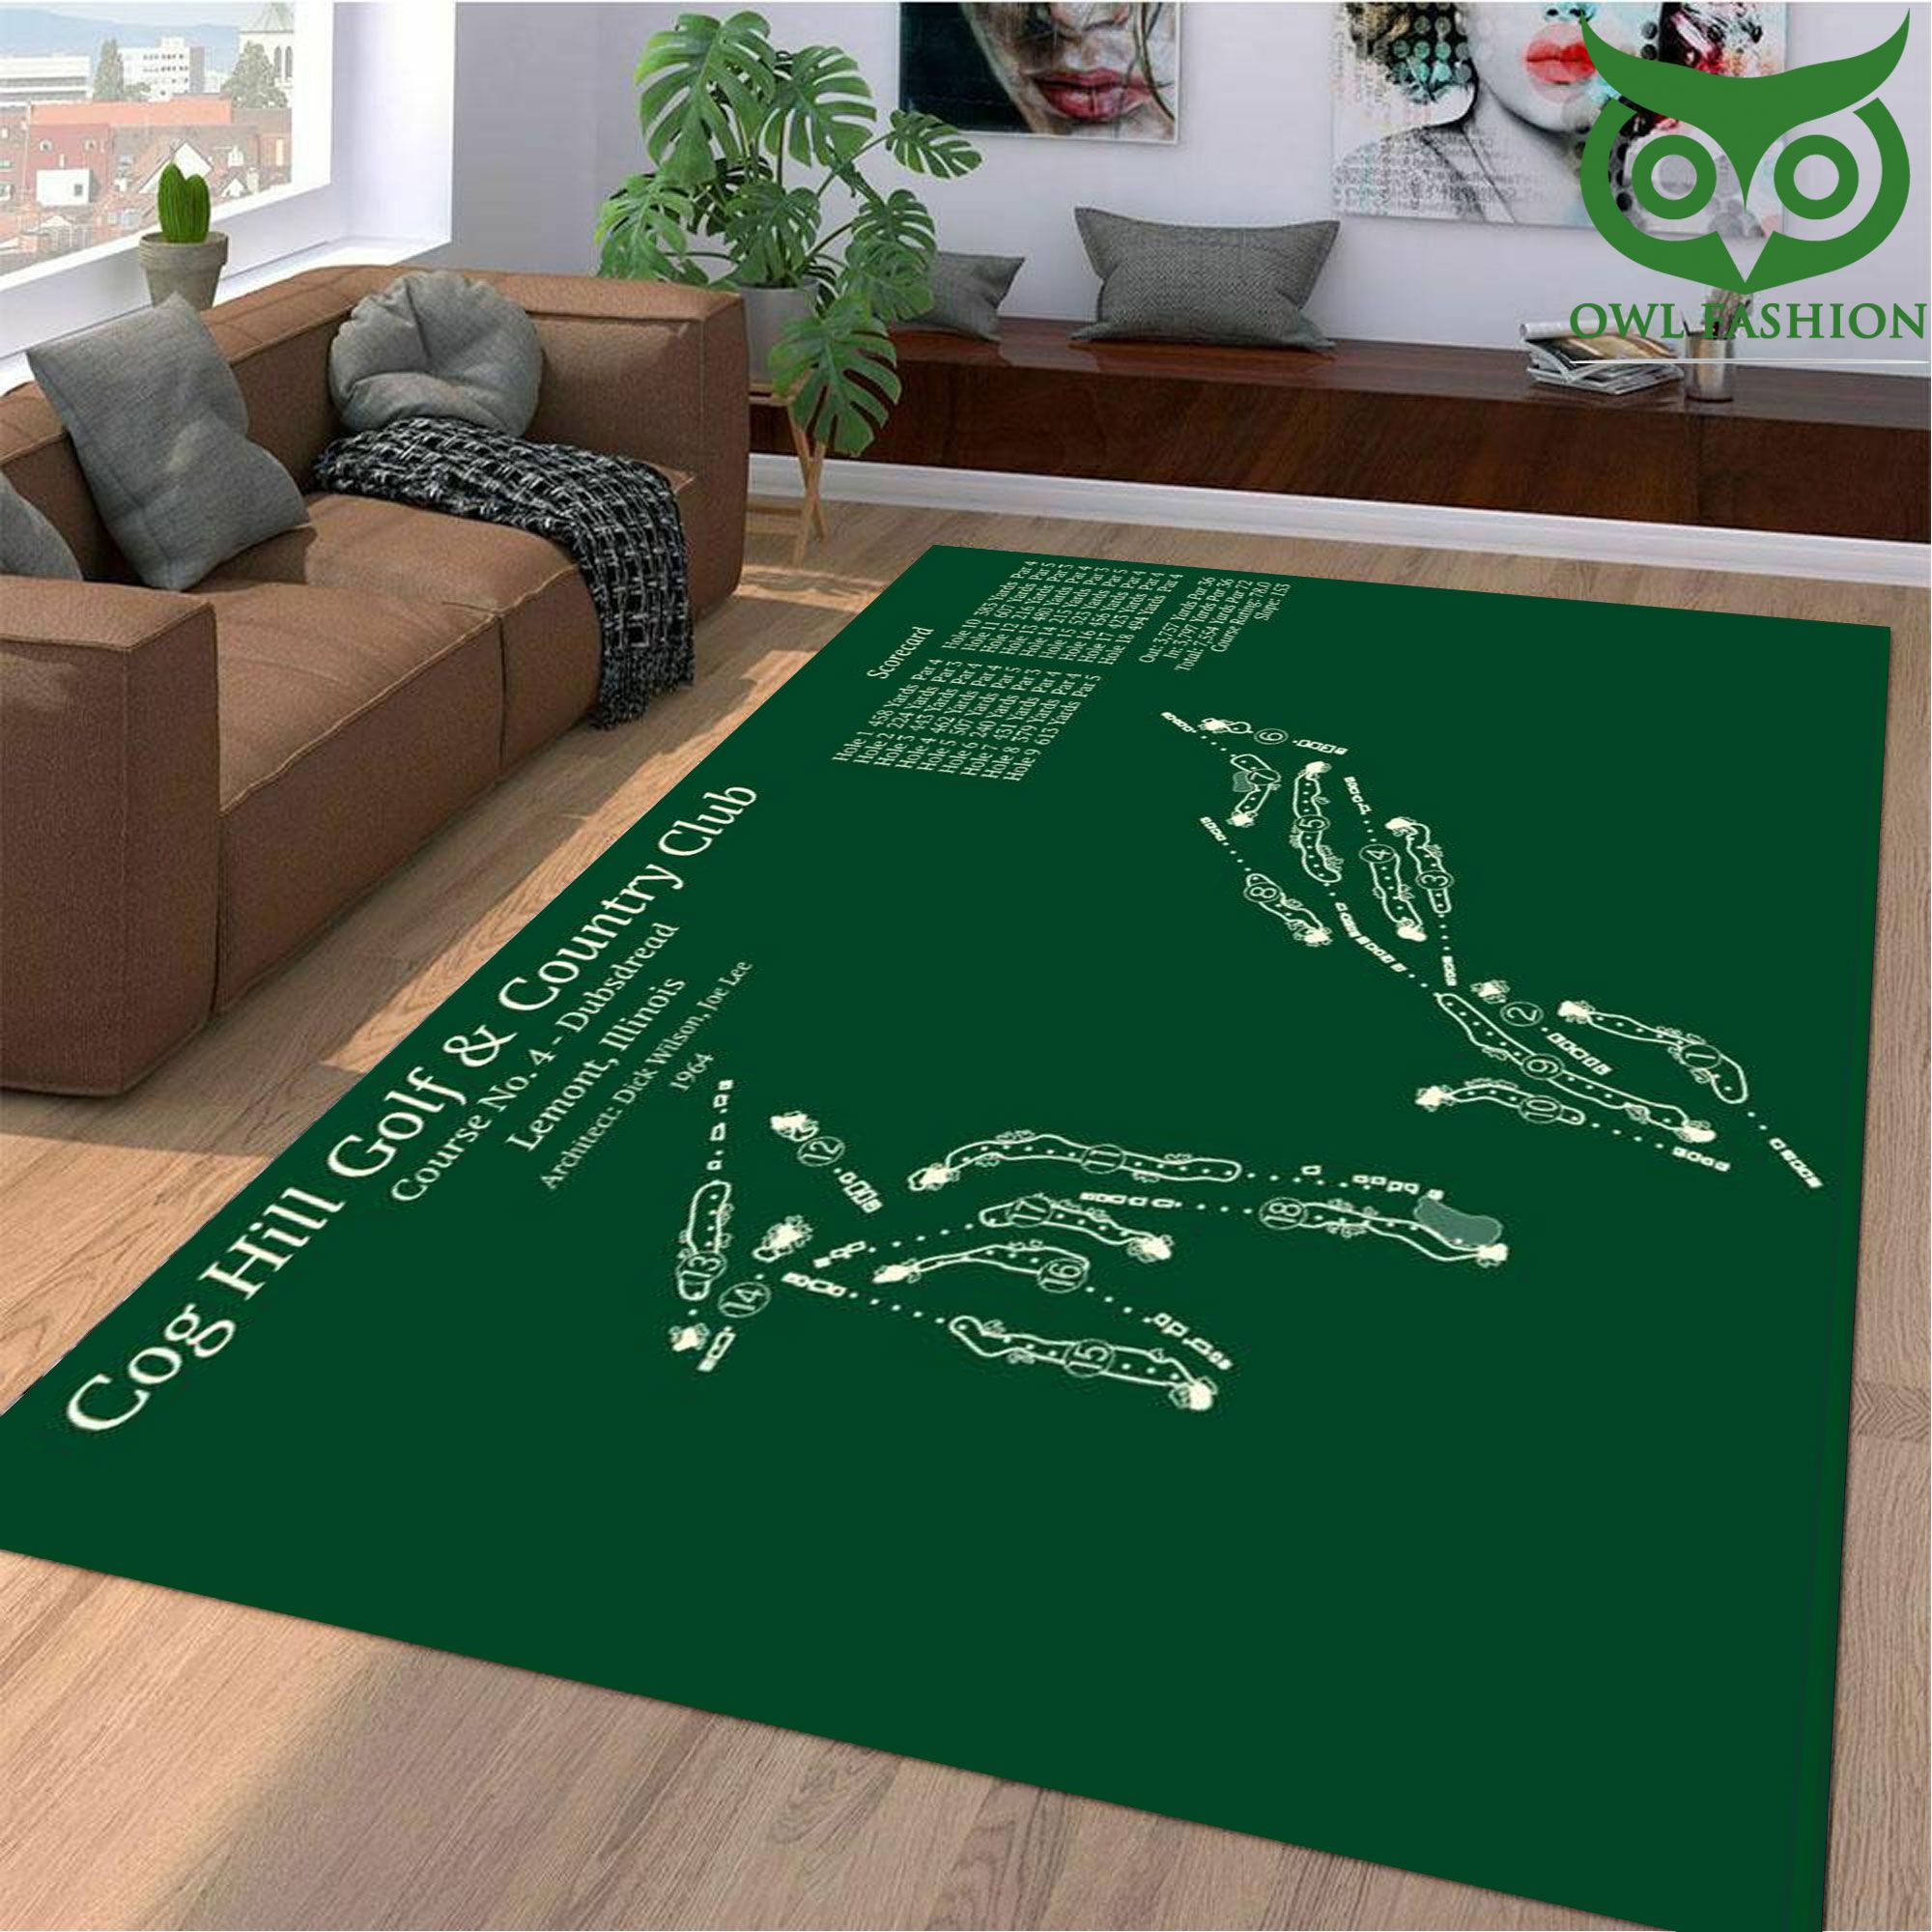 64 Cog hill golf and country club golf course map 3D Carpet Rug